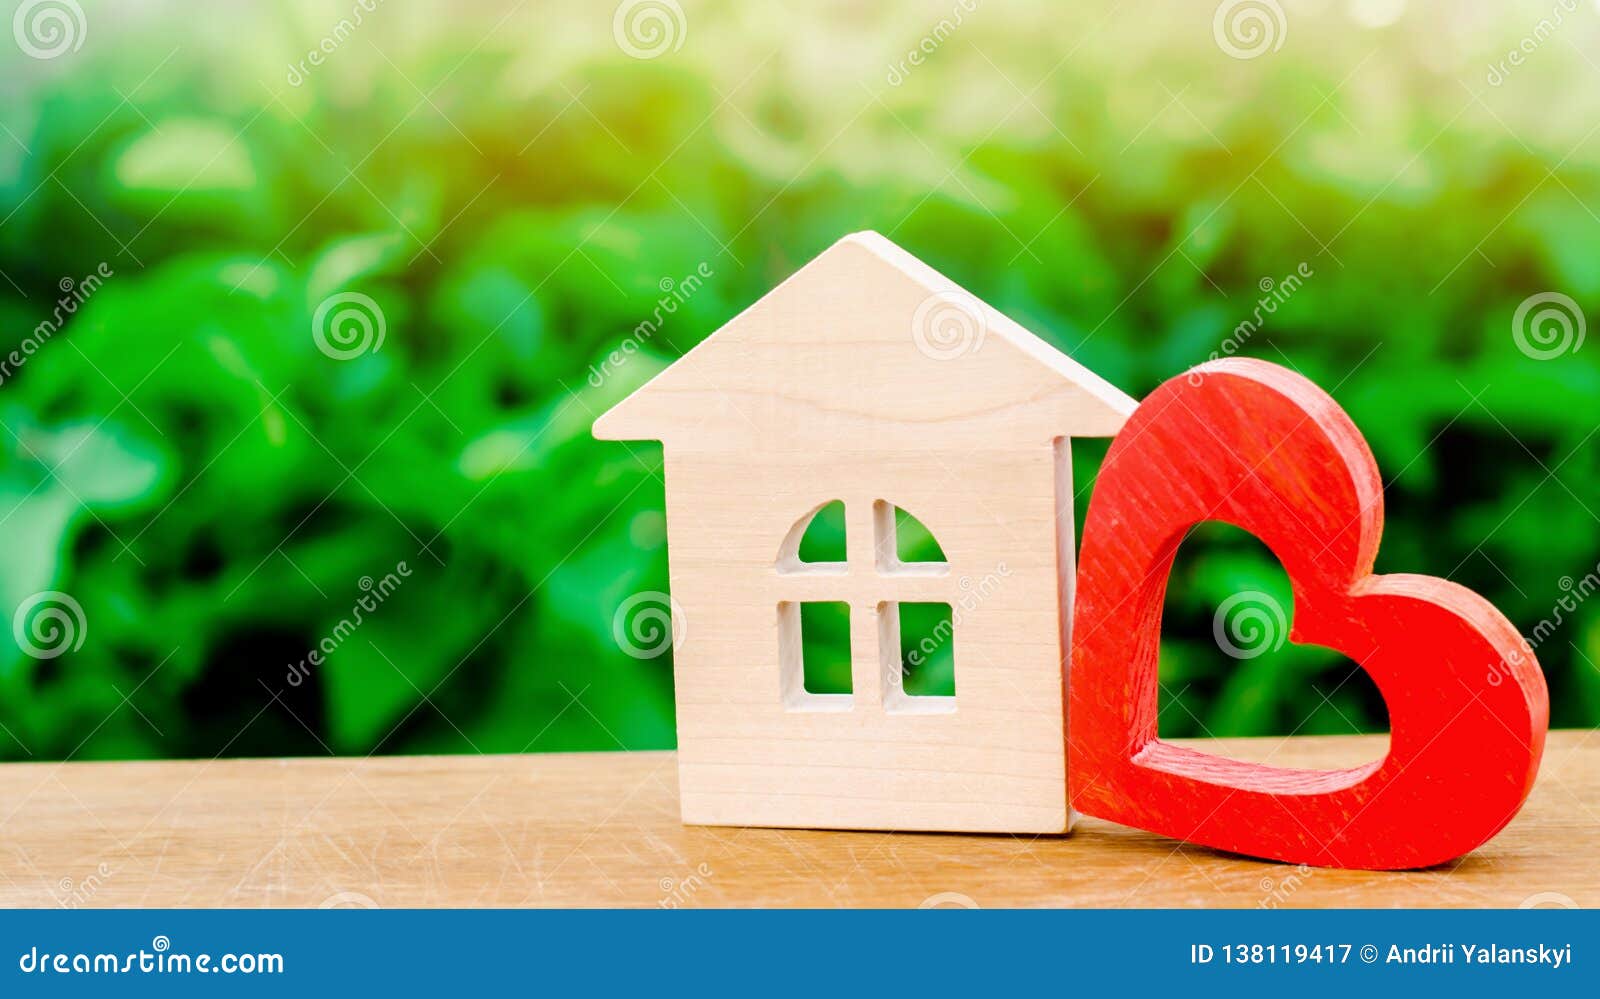 wooden house and red heart. concept of sweet home. property insurance. family comfort. affordable housing for young families.